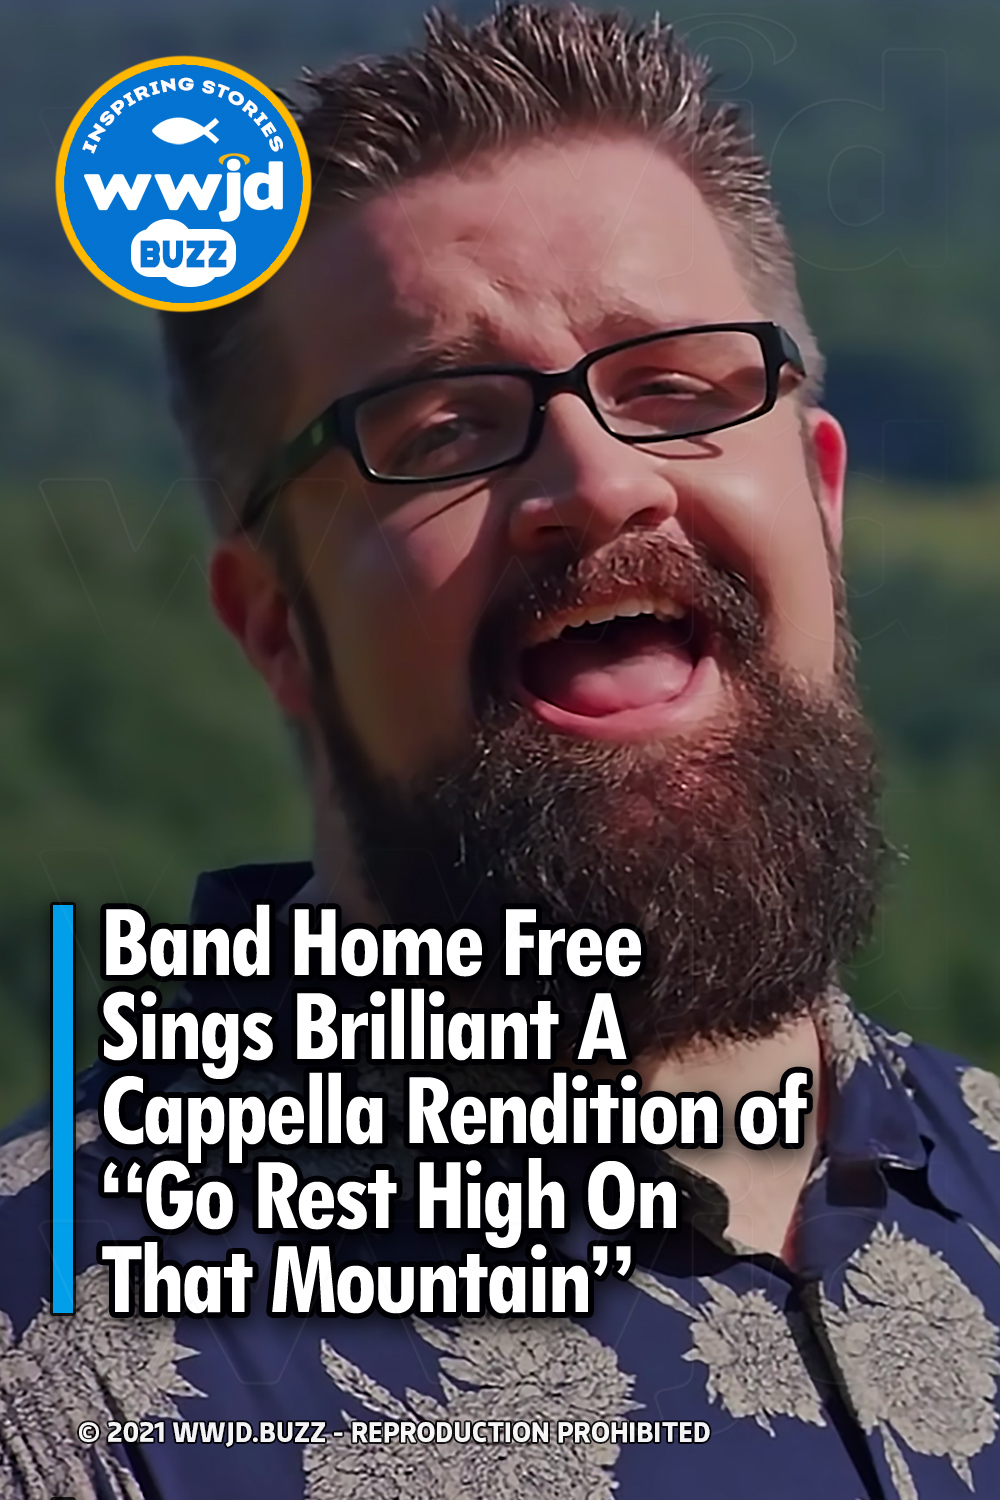 Band Home Free Sings Brilliant A Cappella Rendition of “Go Rest High On That Mountain”